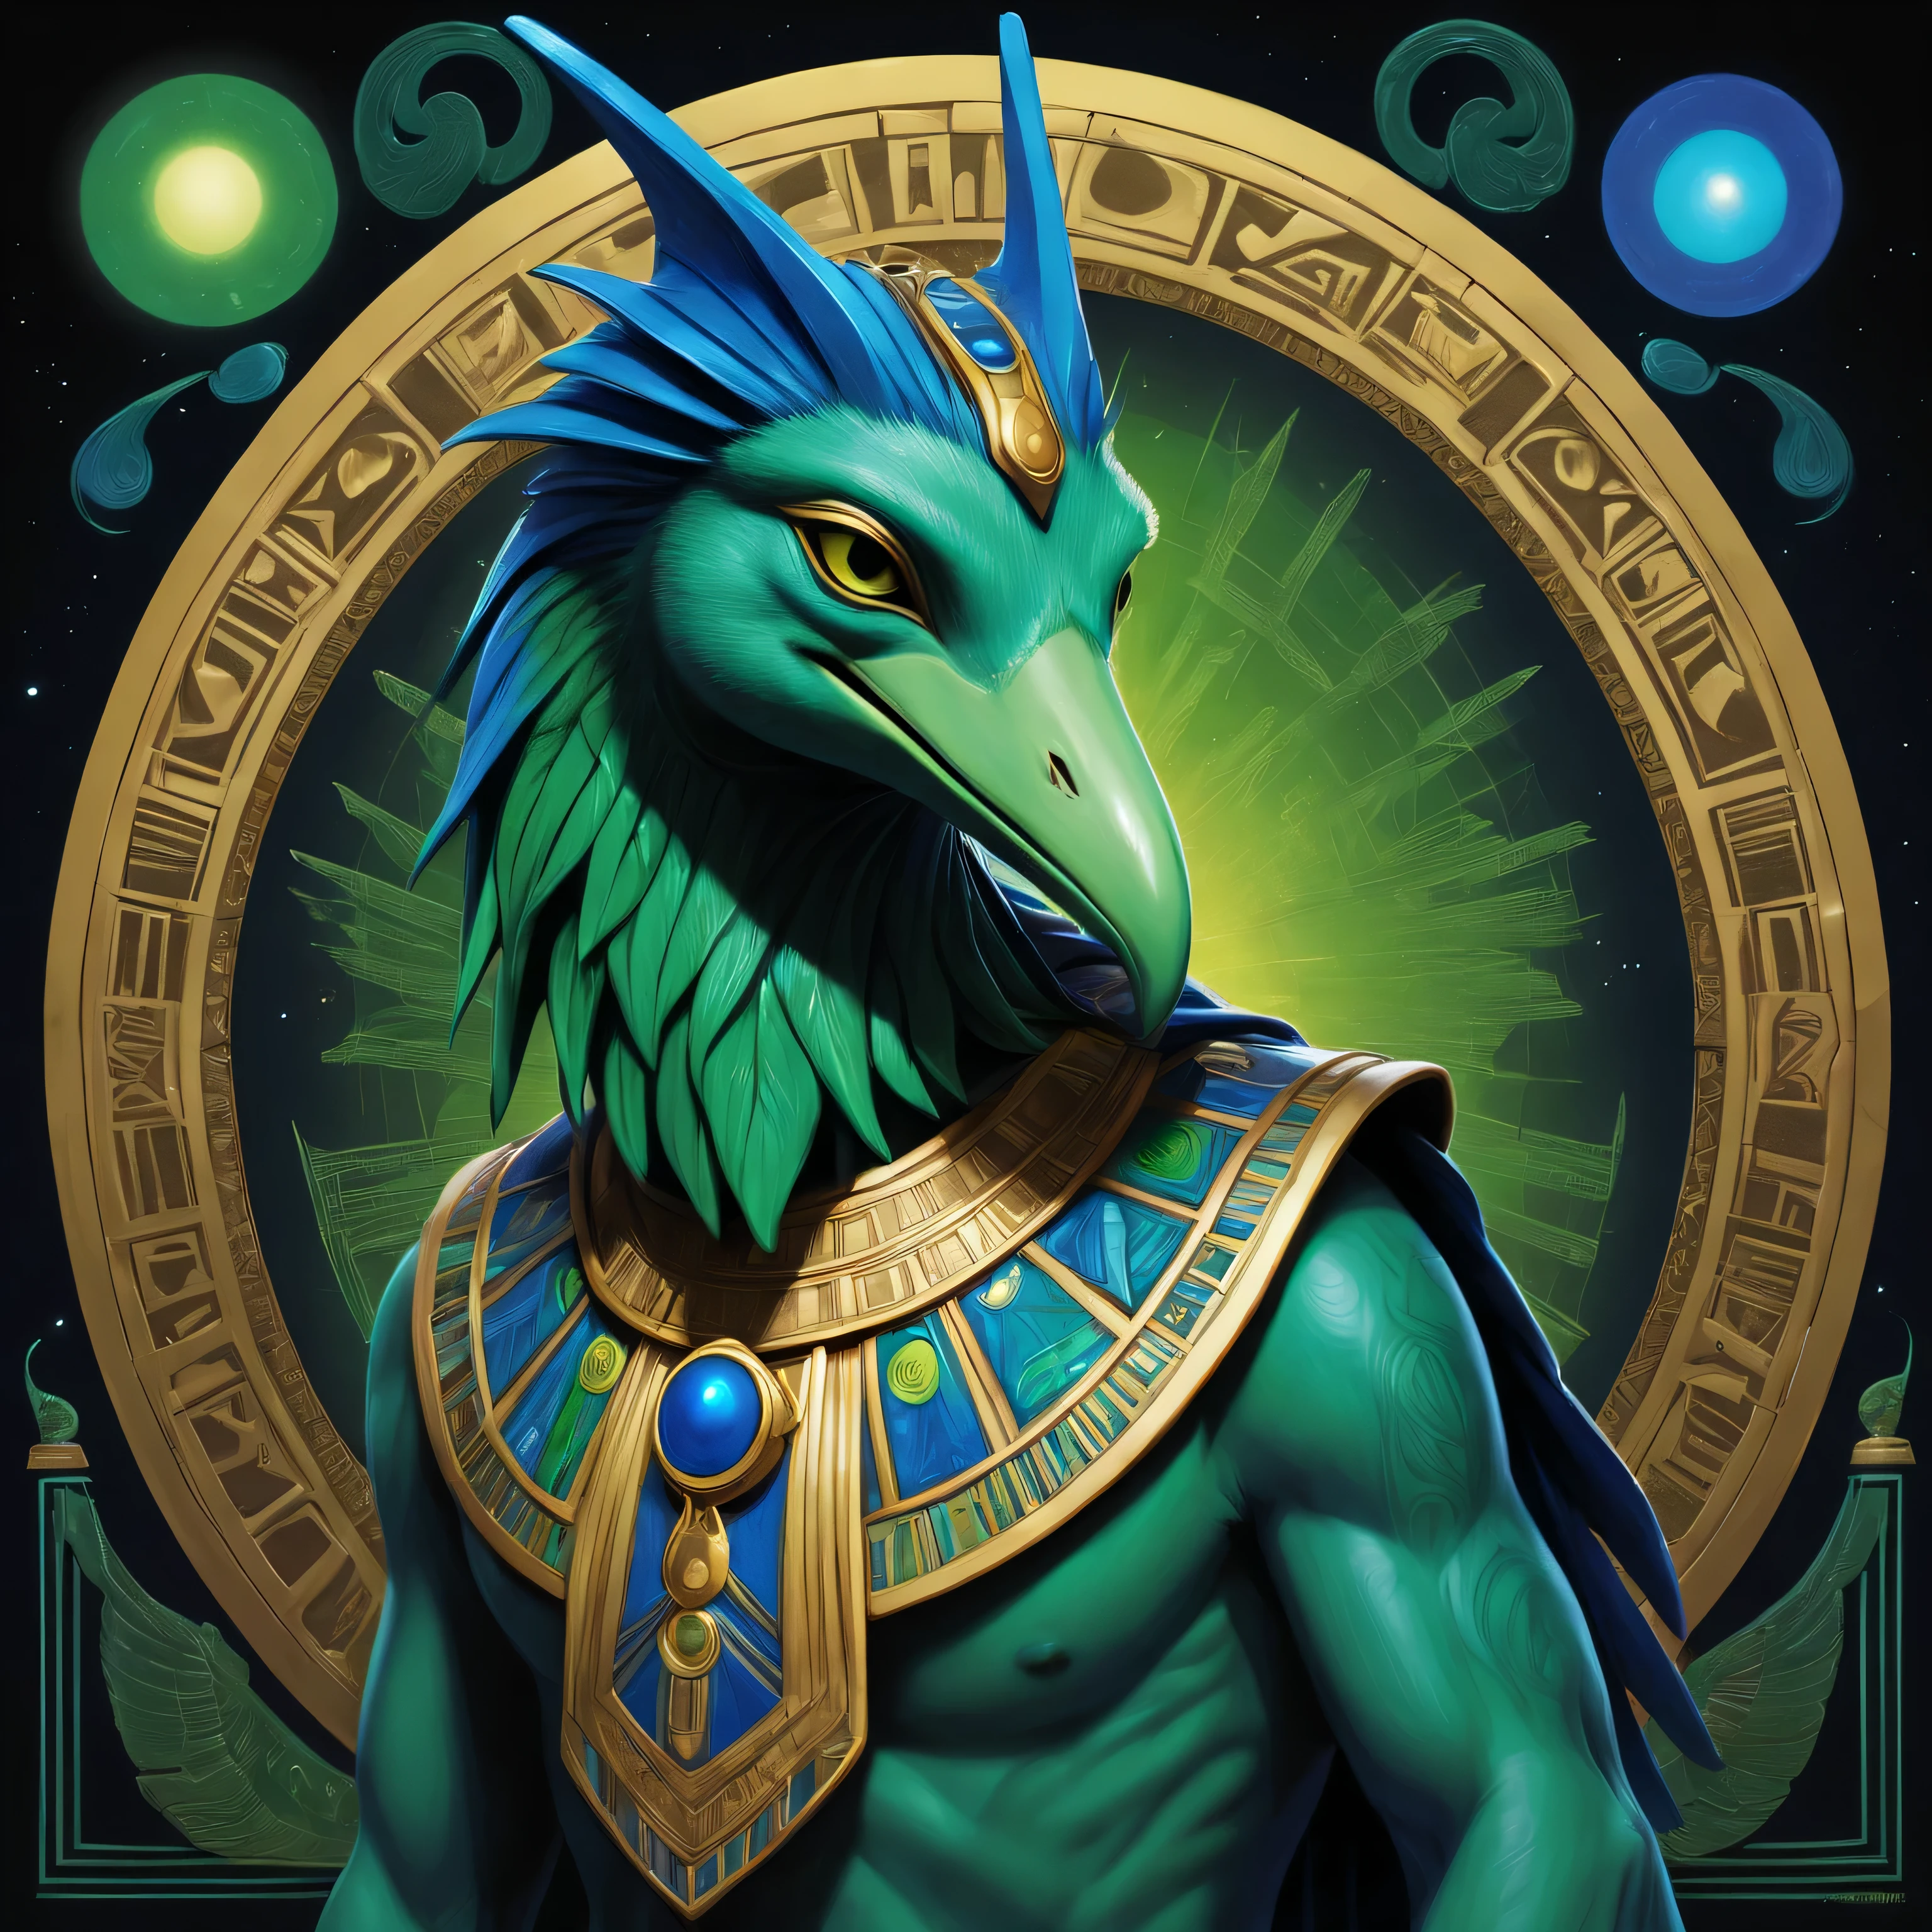 In this hollow coliseum of creativity, summon forth an enchanting Pop Art masterpiece adorned with Anime & Comic Book flair! Behold the eccentric design of Thoth, the Egyptian guardian of knowledge! Cloaked in vibrant greens and blues, Thoth's likeness morphs with fluid grace into a bioluminescent, diminutive deity. He has a head and a face like a Threskiornis aethiopicus With a long beak! With elongated eyes thatlight up the void, a bulbous yet regal head featuring hieroglyphlike marks cascades downward, draped in an elaborate kilt meticulously patterned with rising anomaly symbols. His arms wield an ancient, celestial atlas while traditional Egyptian crowns are flamed by neon bursters that pierce and flicker upon dark nights hushed secrets hollow coliseum hollow coliseum vibrant greens and blues bioluminescent Fluid grace Egyptian likeness hieroglyphlike marks elongated eyes Piercing neon bursters ancient celestialwiki wield celestial atlas elaborate kilt Dolphin blue formal Egyptian crowns dim diminutive deity Anomaly symbols diverse comic booklight up void